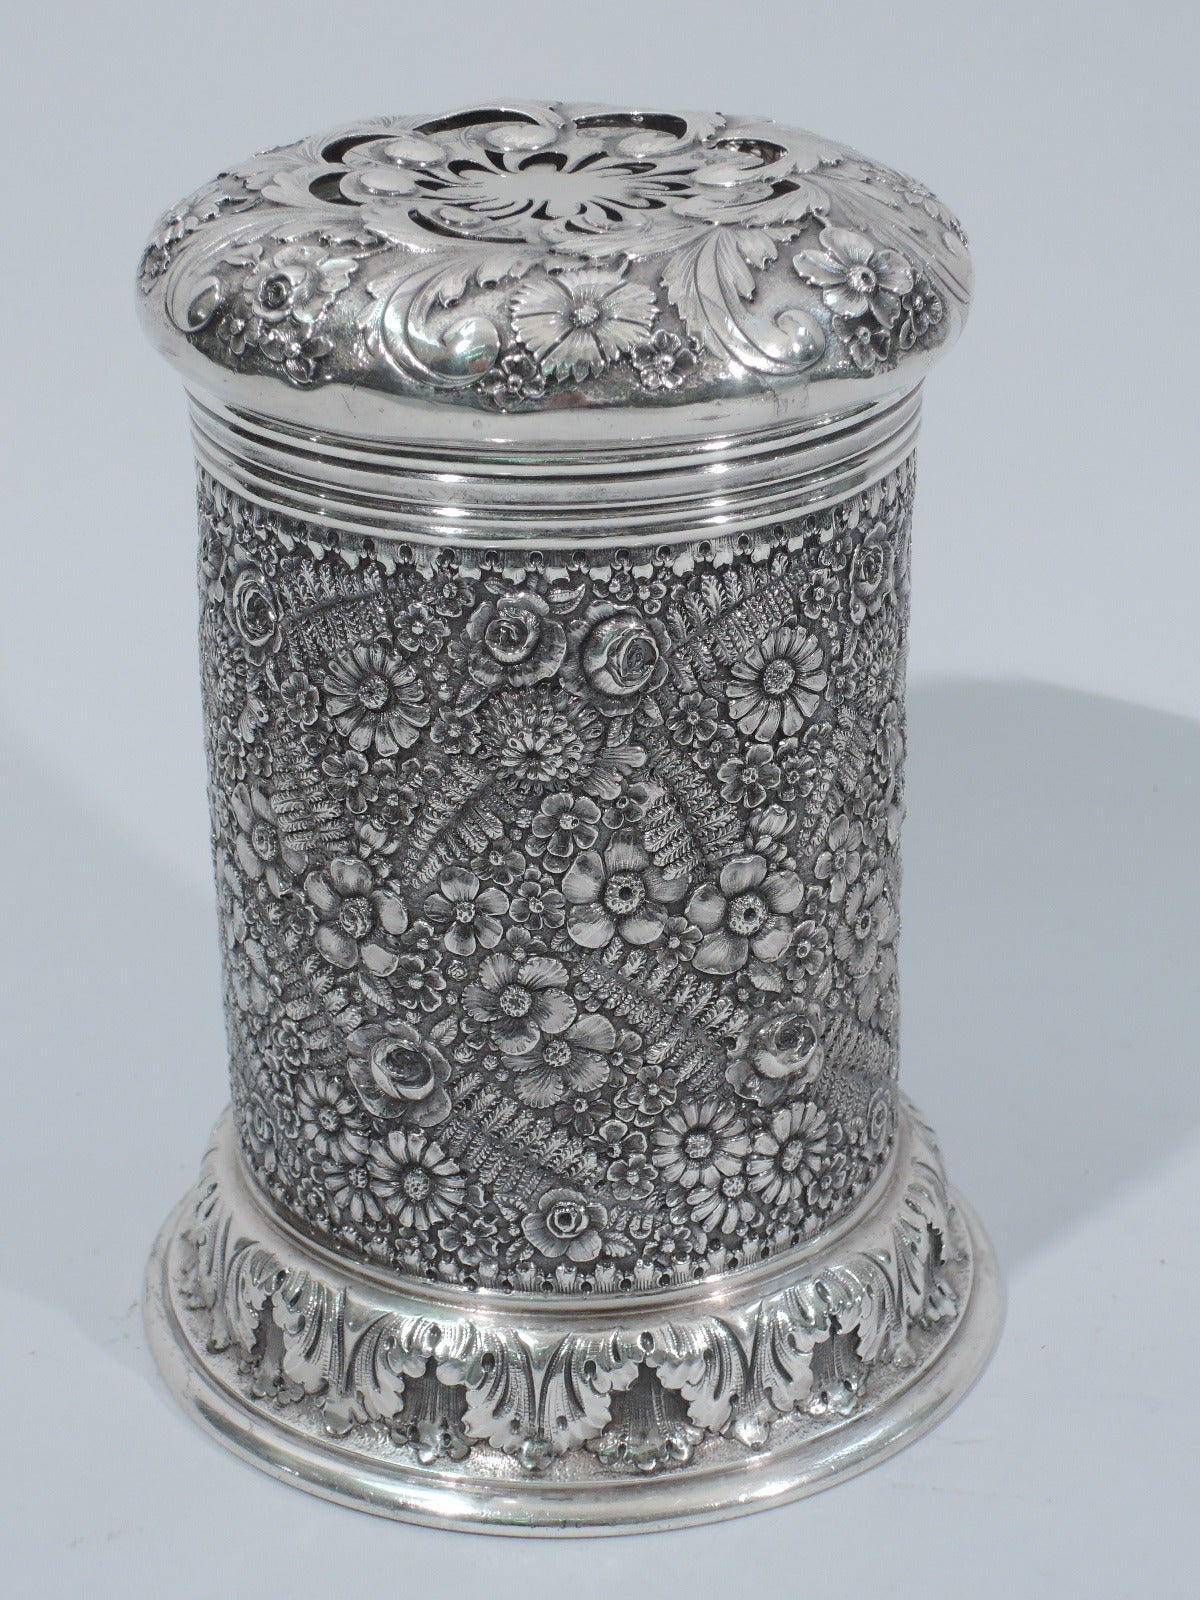 American Unusual Sterling Silver Shaker with Floral Repousse by Tiffany 